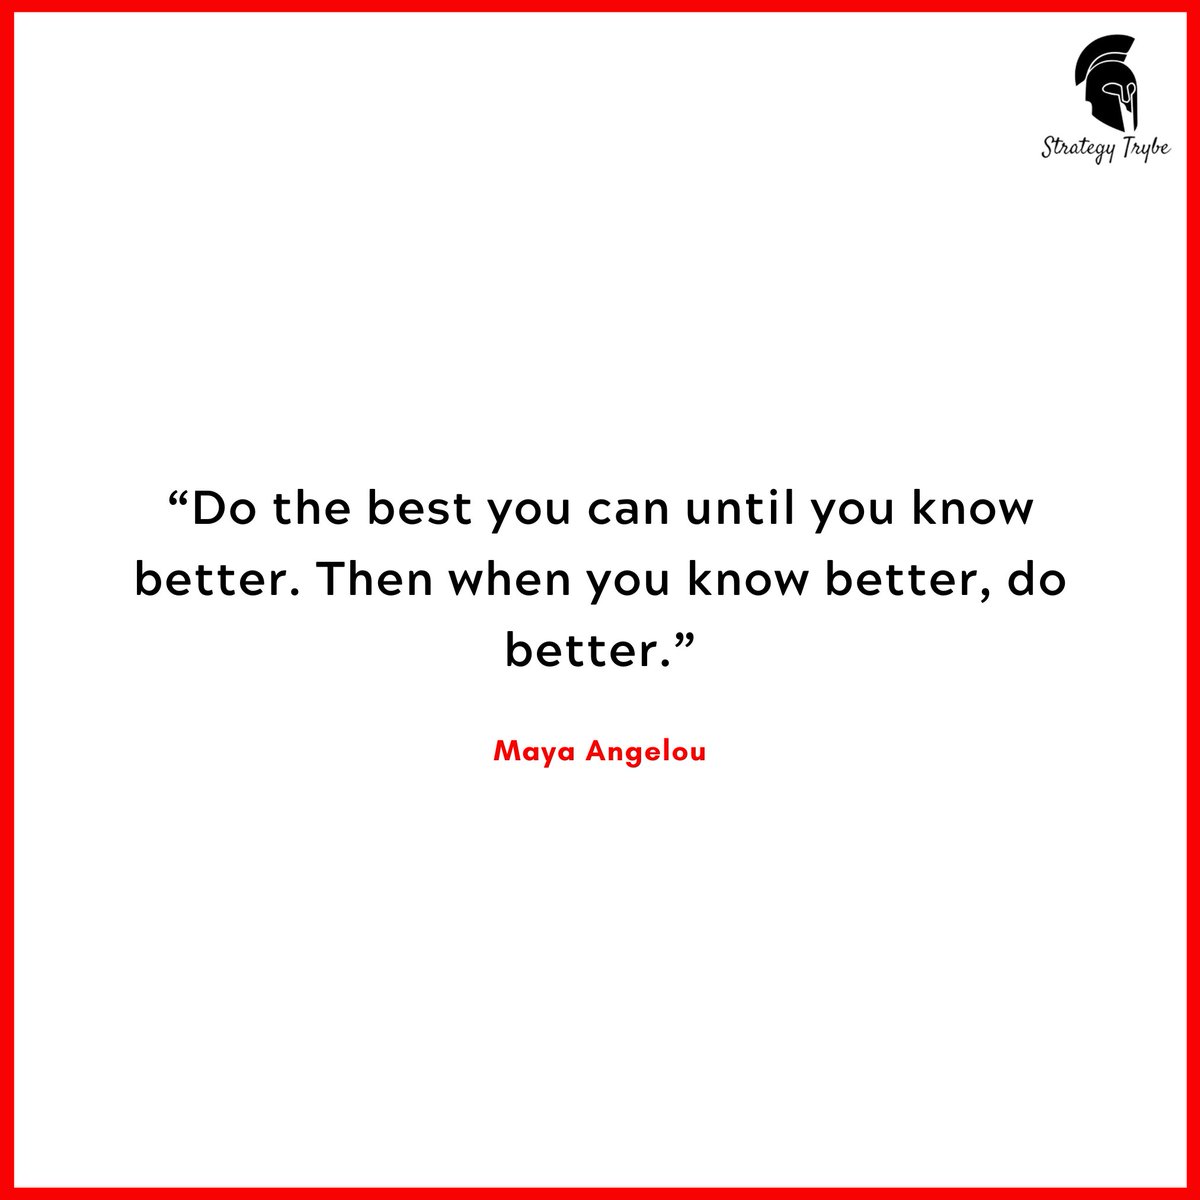 Start from where you are and build incrementally. Embrace growth, Keep evolving, keep learning.

#StrategyTrybe #MondayMotivation #Growth #MayaAngelou #Strategy #AccountPlanning #MarketingCommunications #Creativity #Lagos #Nigeria #Africa